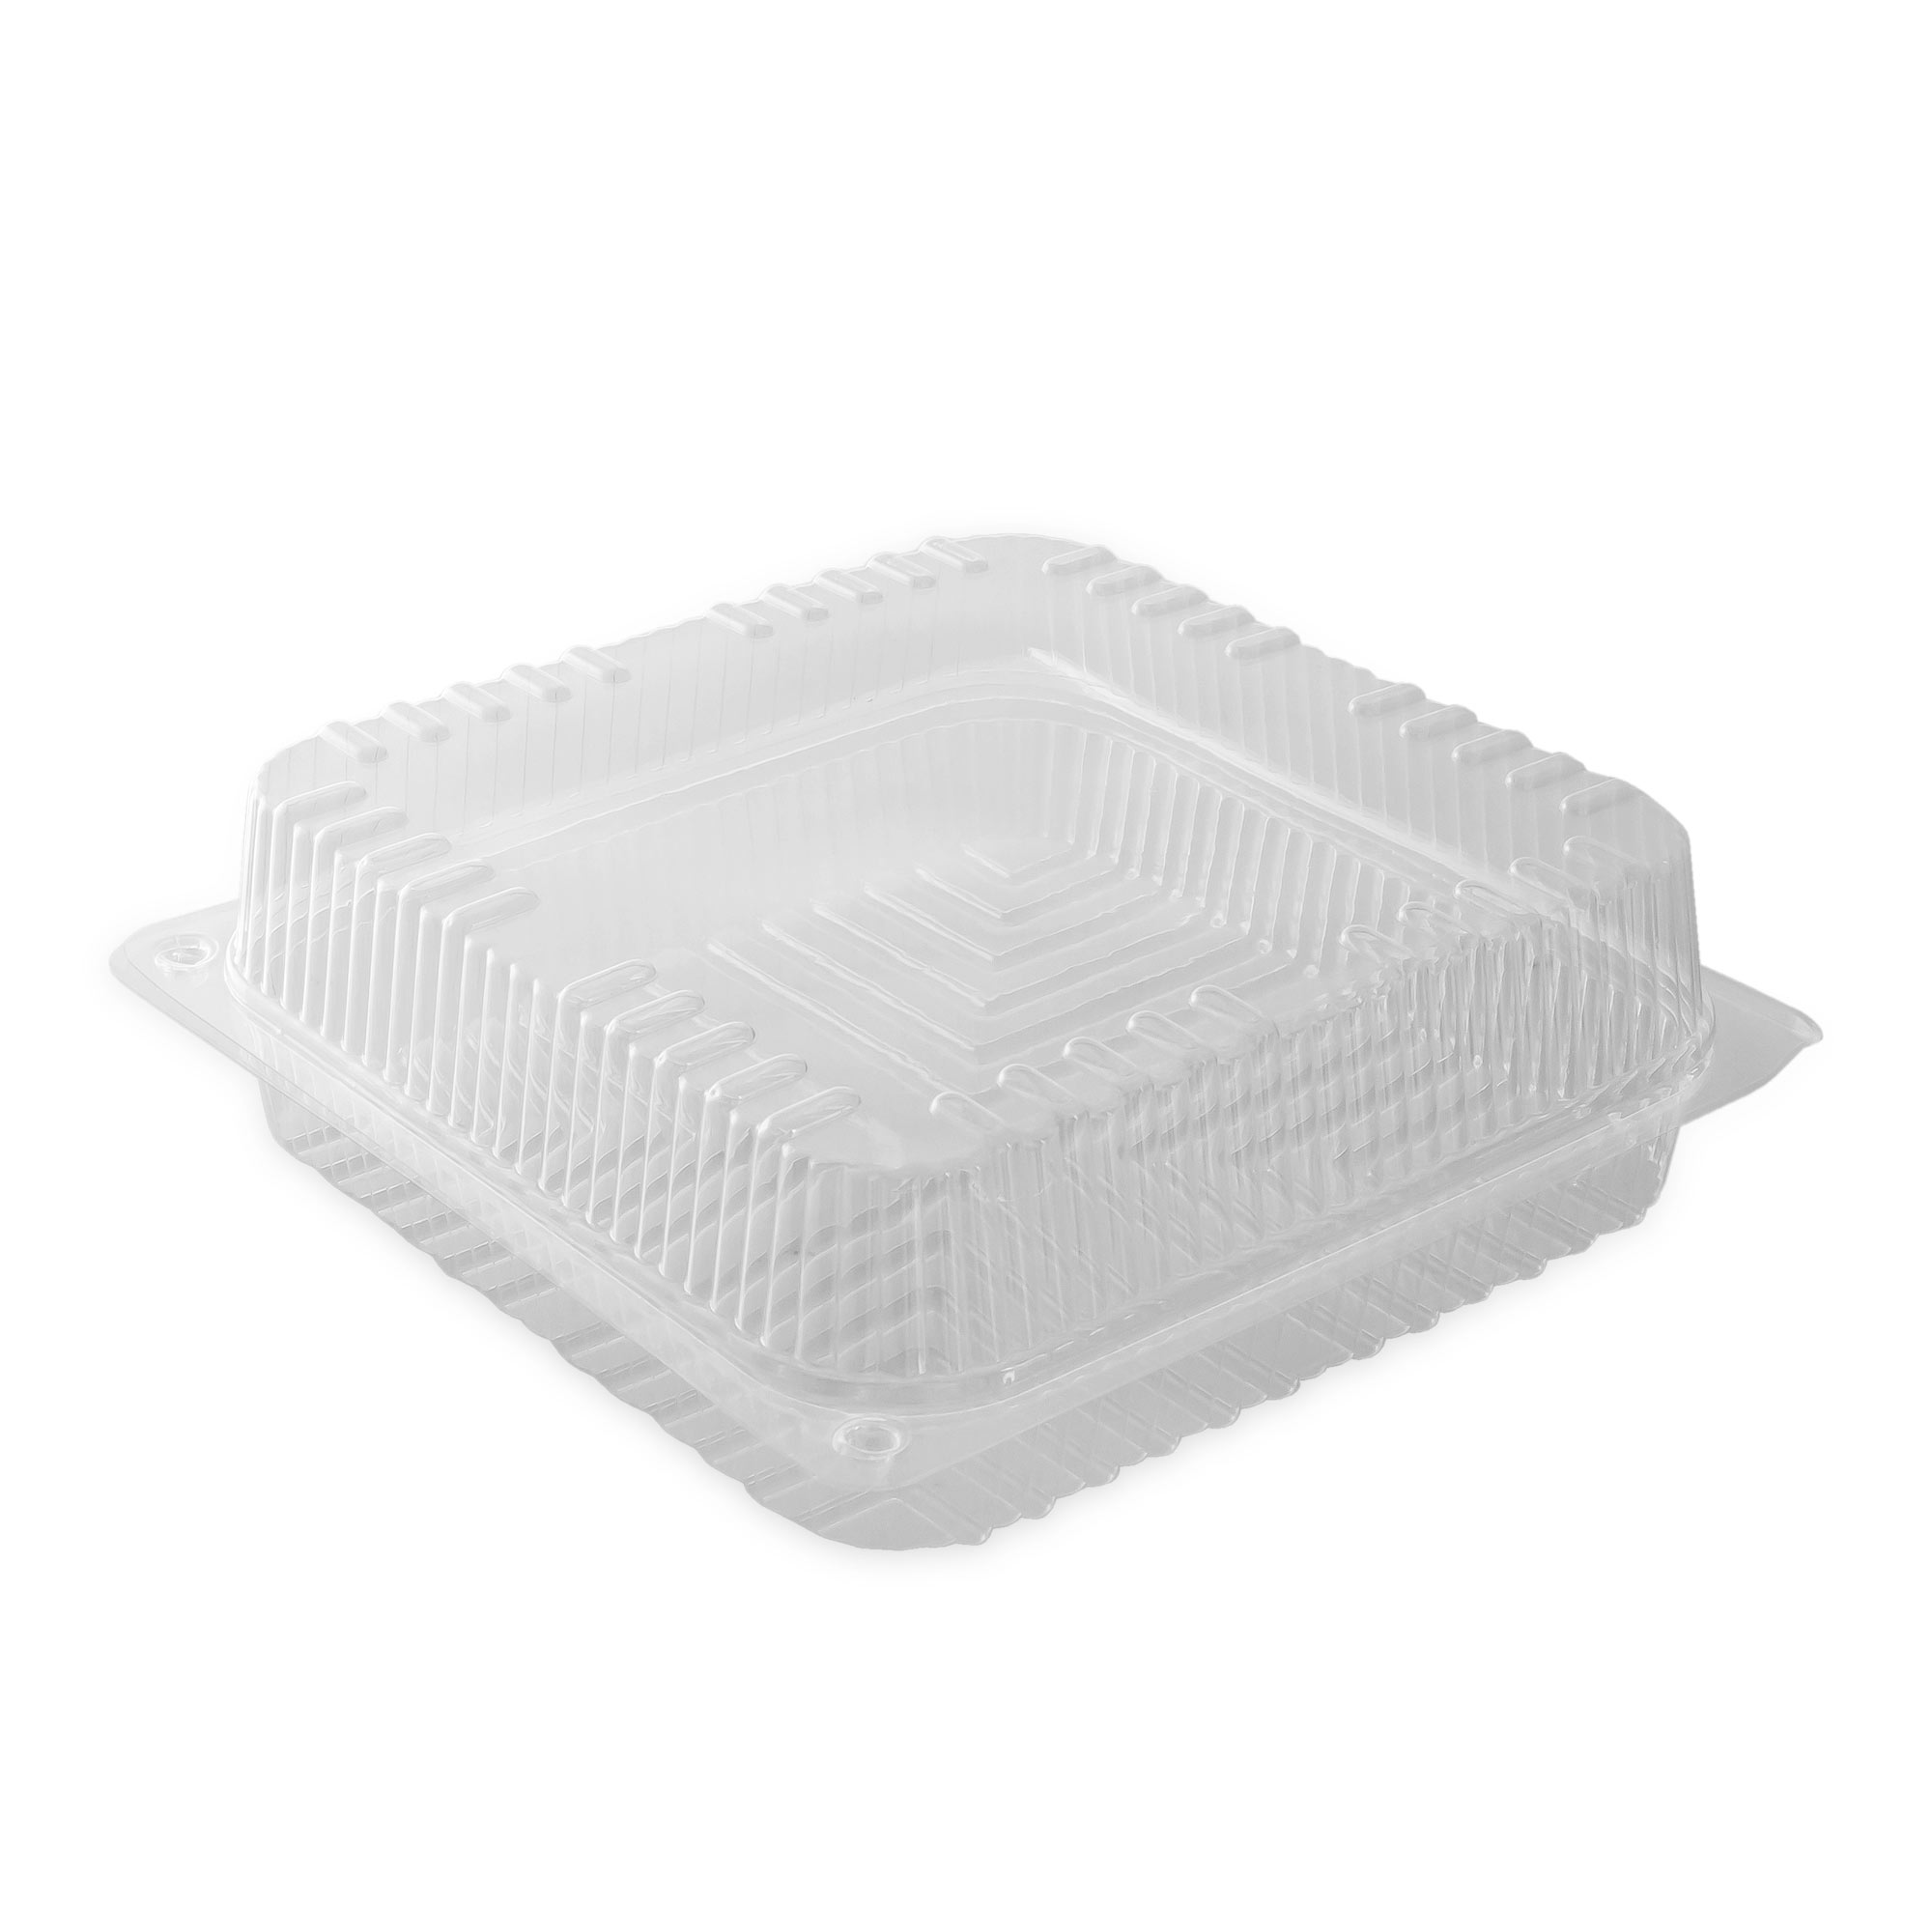 Bakery Box Clear (Square Shape)